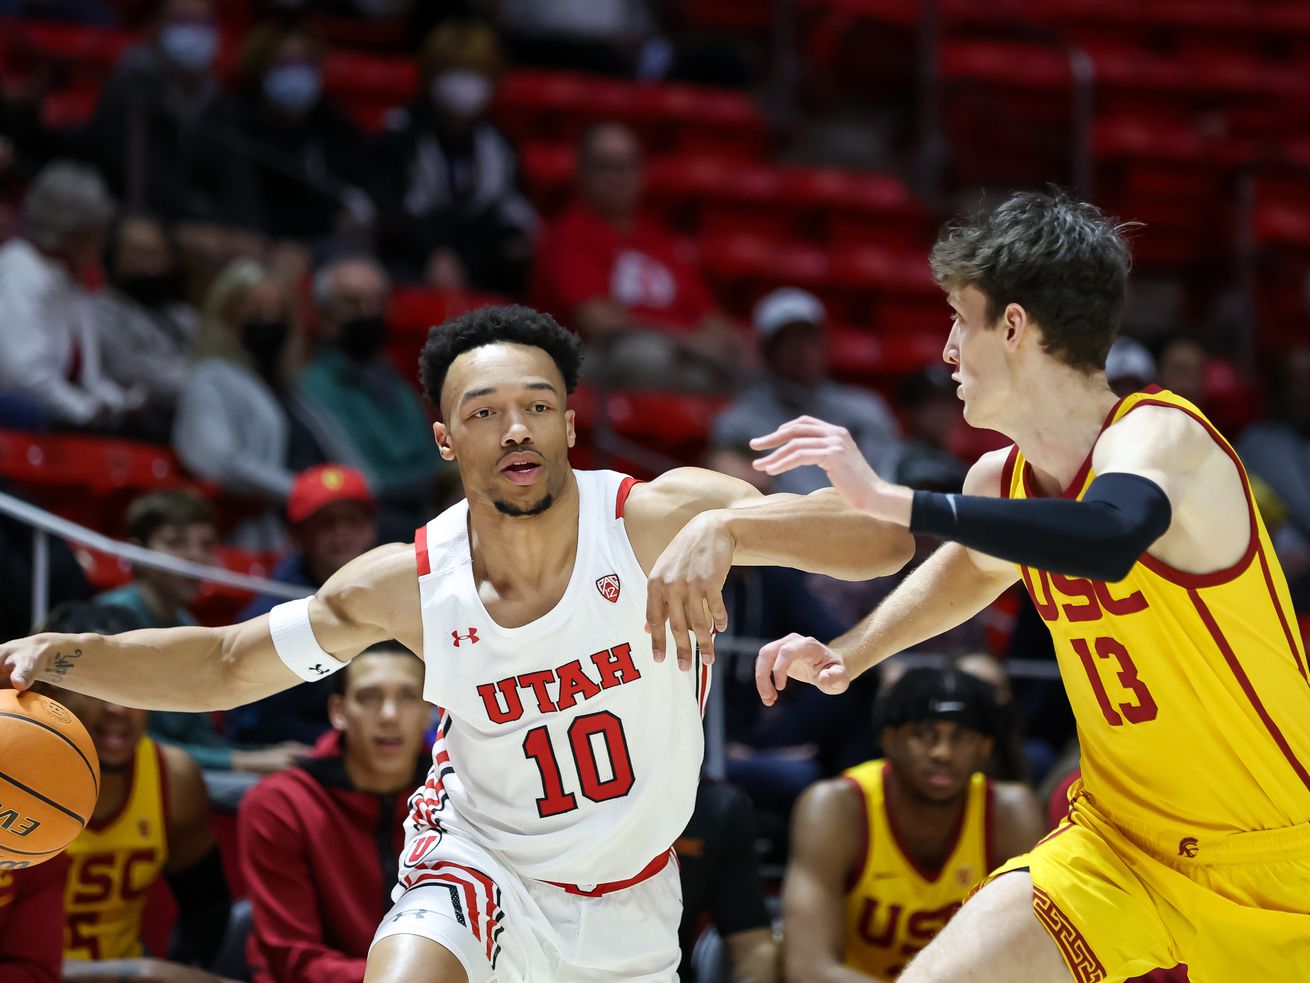 Utah Utes guard Marco Anthony (10) drives against USC Trojans guard Drew Peterson (13) during the game at the Huntsman Center in Salt Lake City on Saturday, Jan. 22, 2022.